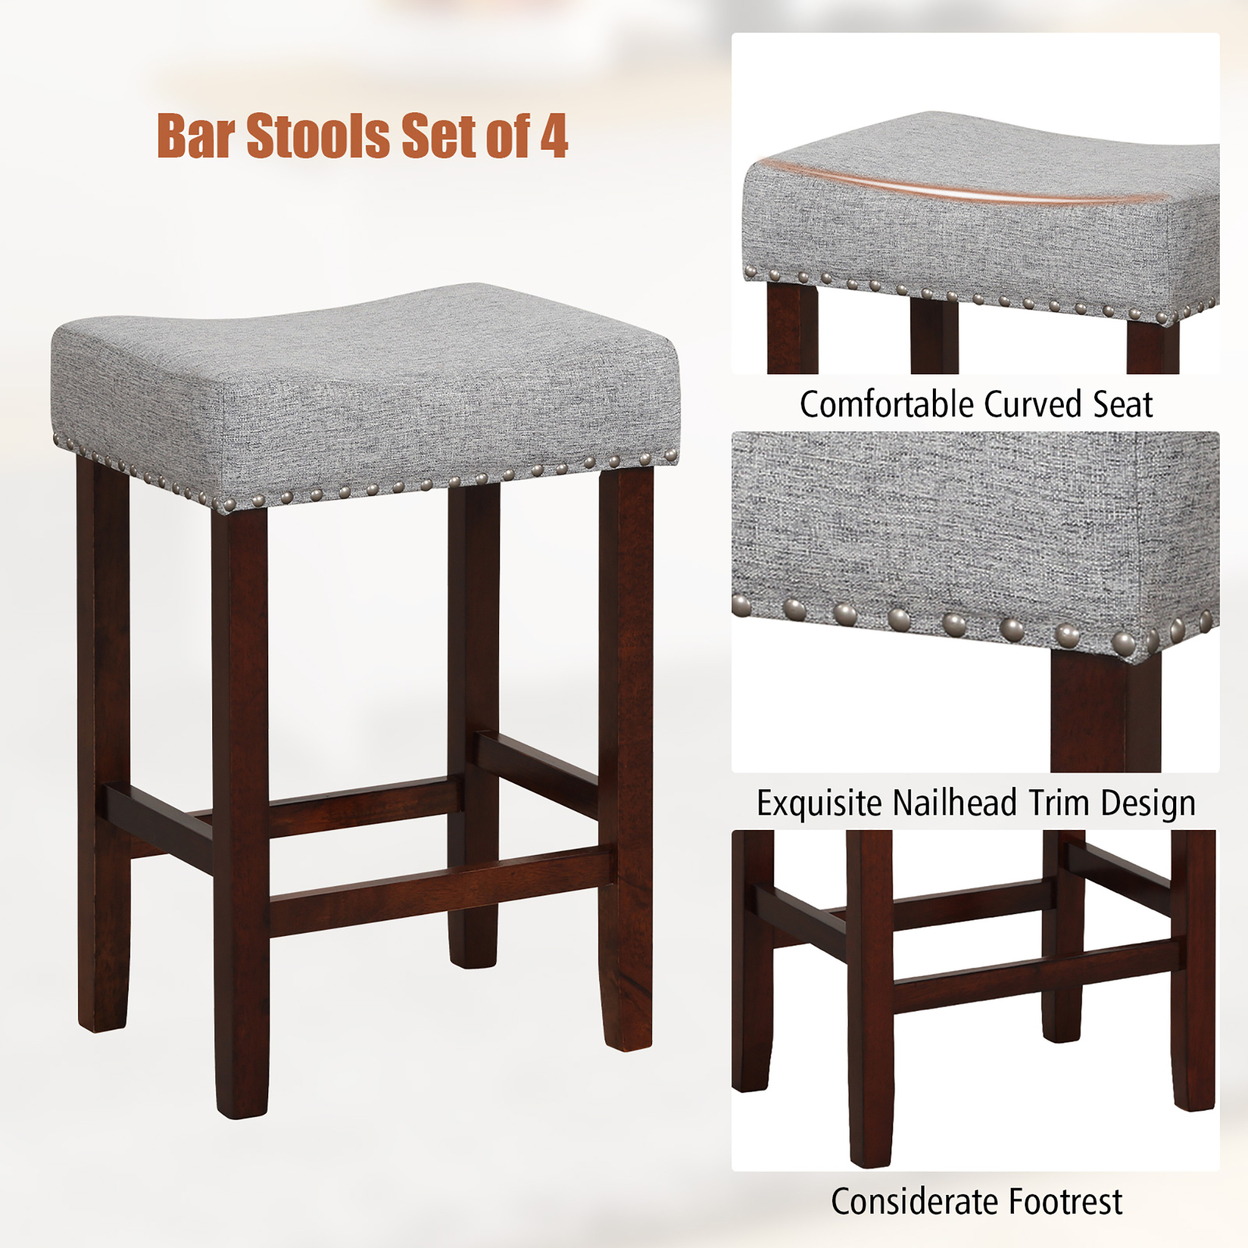 Set Of 4 Bar Stools Counter Height Saddle Kitchen Chairs W/ Wooden Legs - Gray + Brown